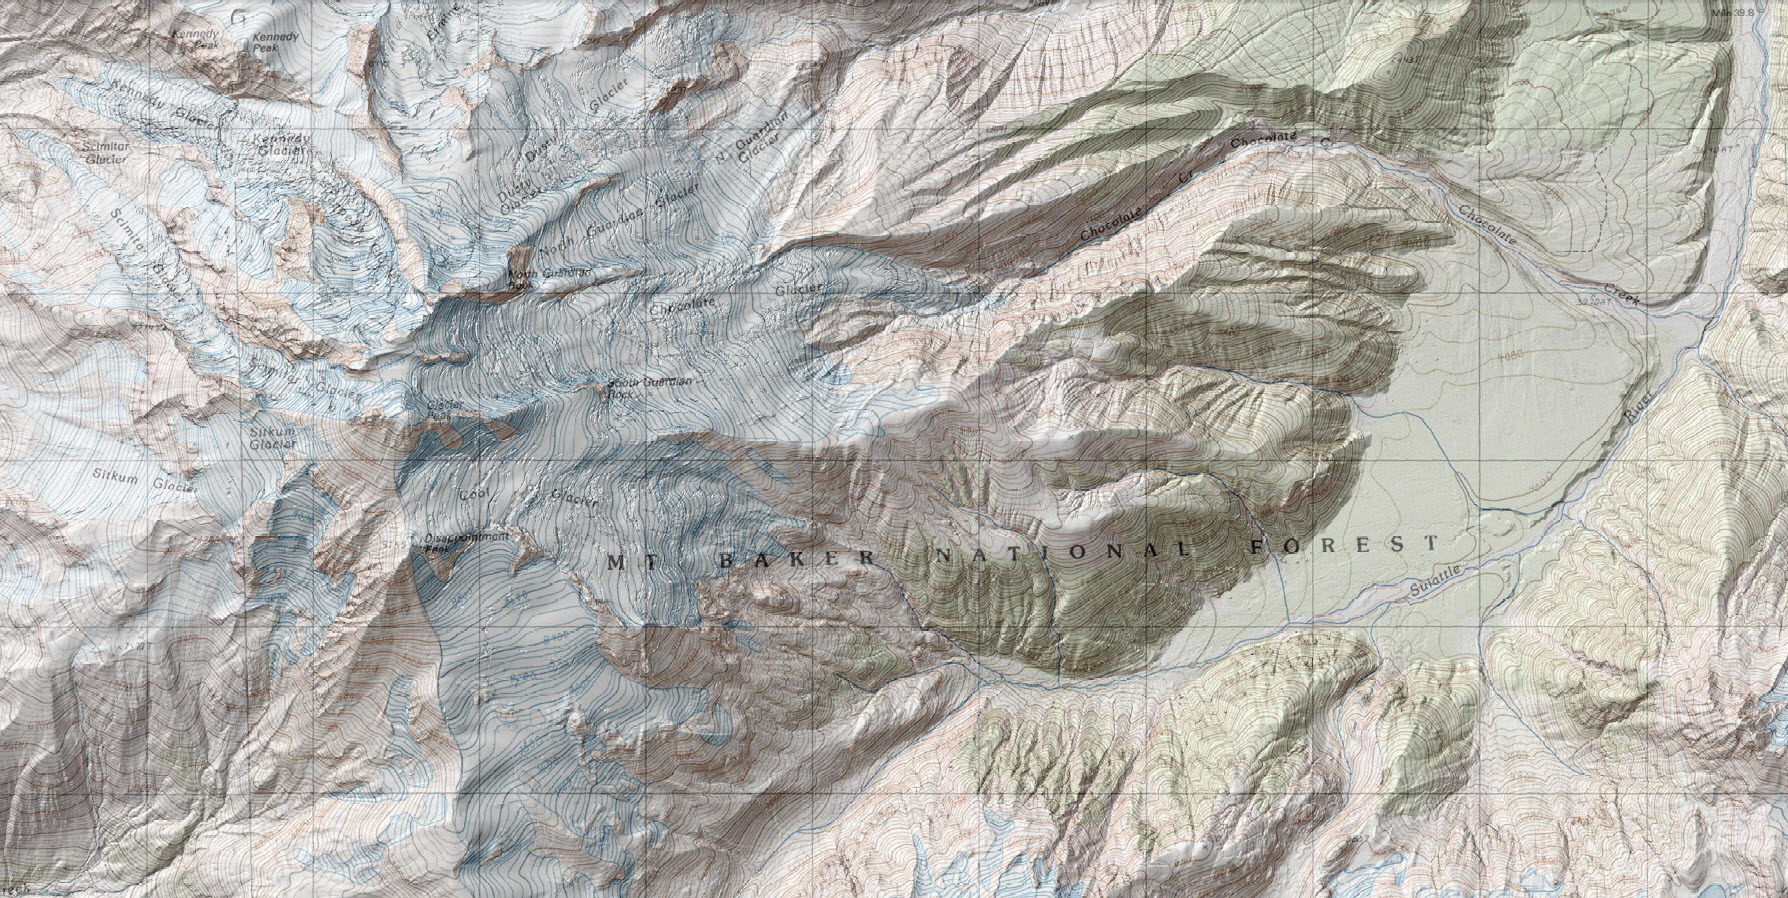 Map shows 1-m lidar-derived digital elevation model (DEM) data superimposed on a 1:24,000 USGS topographic map of the center of the lidar collection area for Glacier Peak. Glacier Peak’s high altitude, steep terrain, and extremely dense forest cover make lidar collection perhaps the most difficult in the conterminous United States. The lidar data are being used for geologic mapping to reveal volcanic deposits on the mountain as well as in steep, forested river drainages. Elevation models derived from the lidar data will be used for computational modeling of volcano hazards, such as lahars (volcanic mudflows) that could travel downstream and affect nearby populated areas.